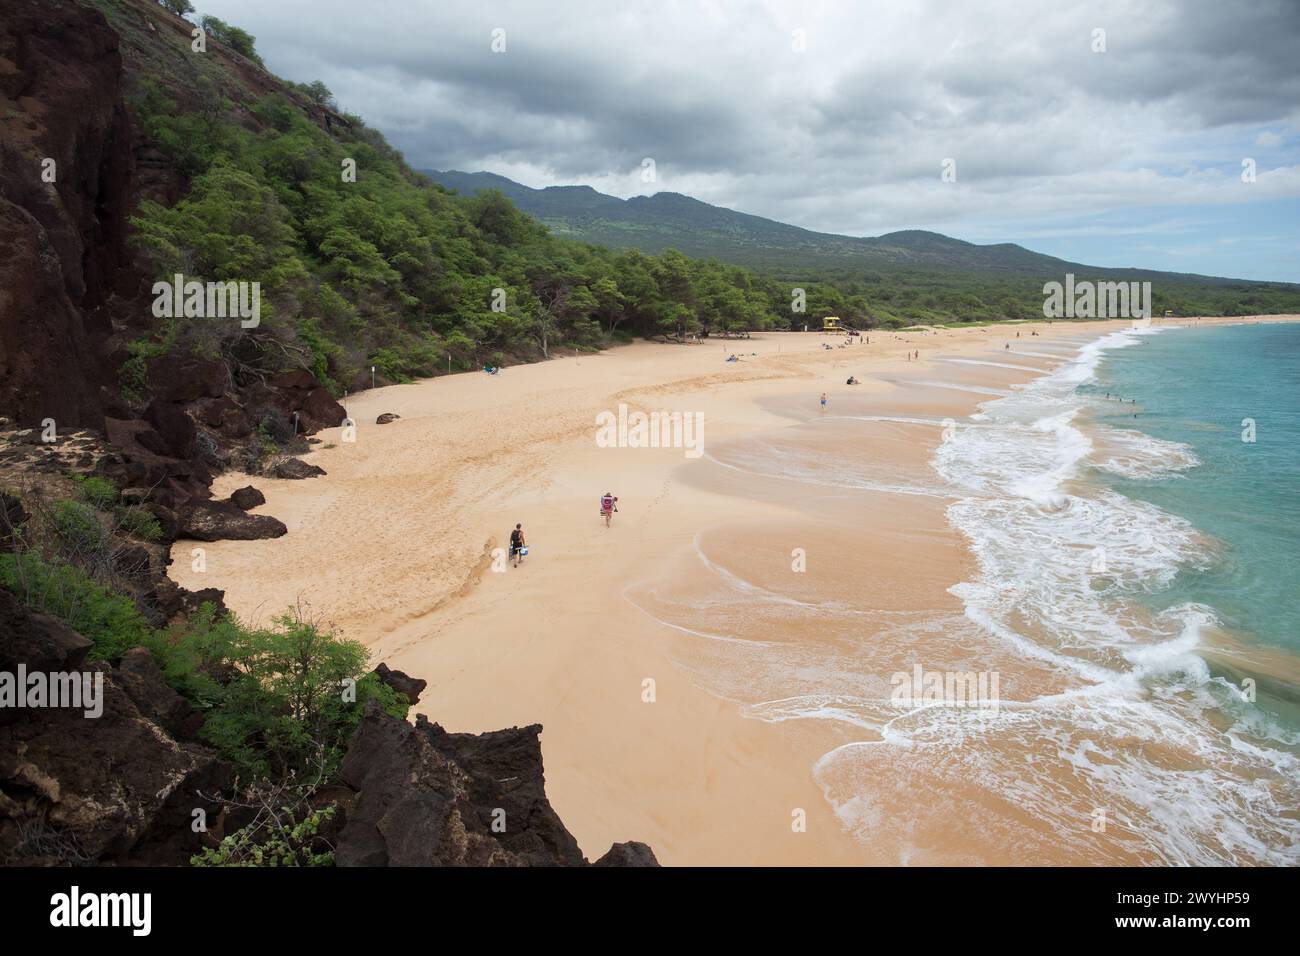 Makena Beach or Big Beach is a popular vacation spot for swimming and suntanning on the island of Maui, Hawaii Stock Photo